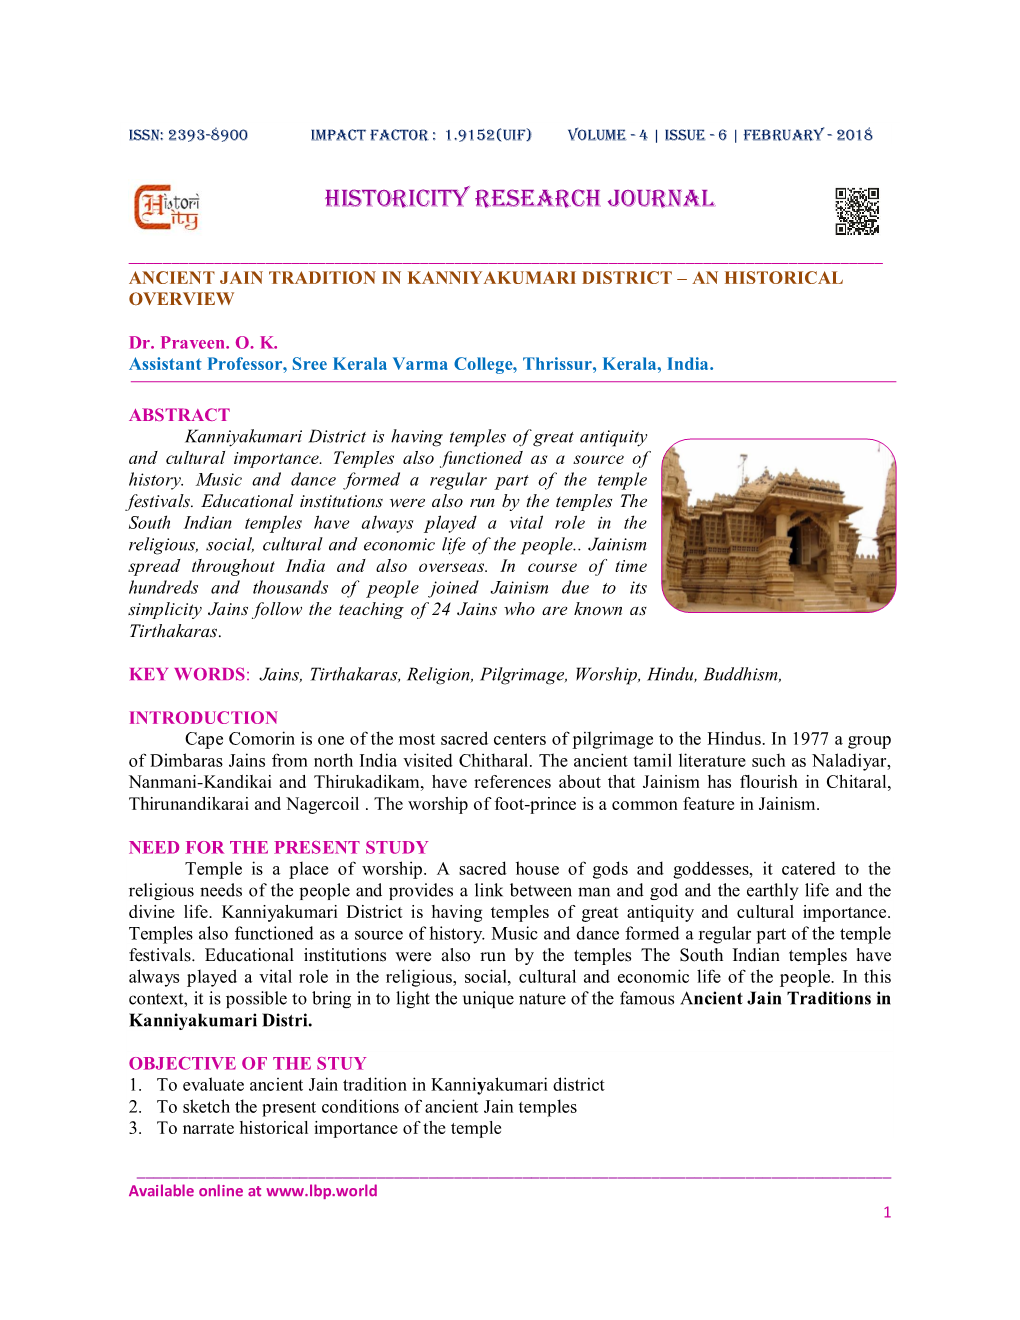 Historicity Research Journal